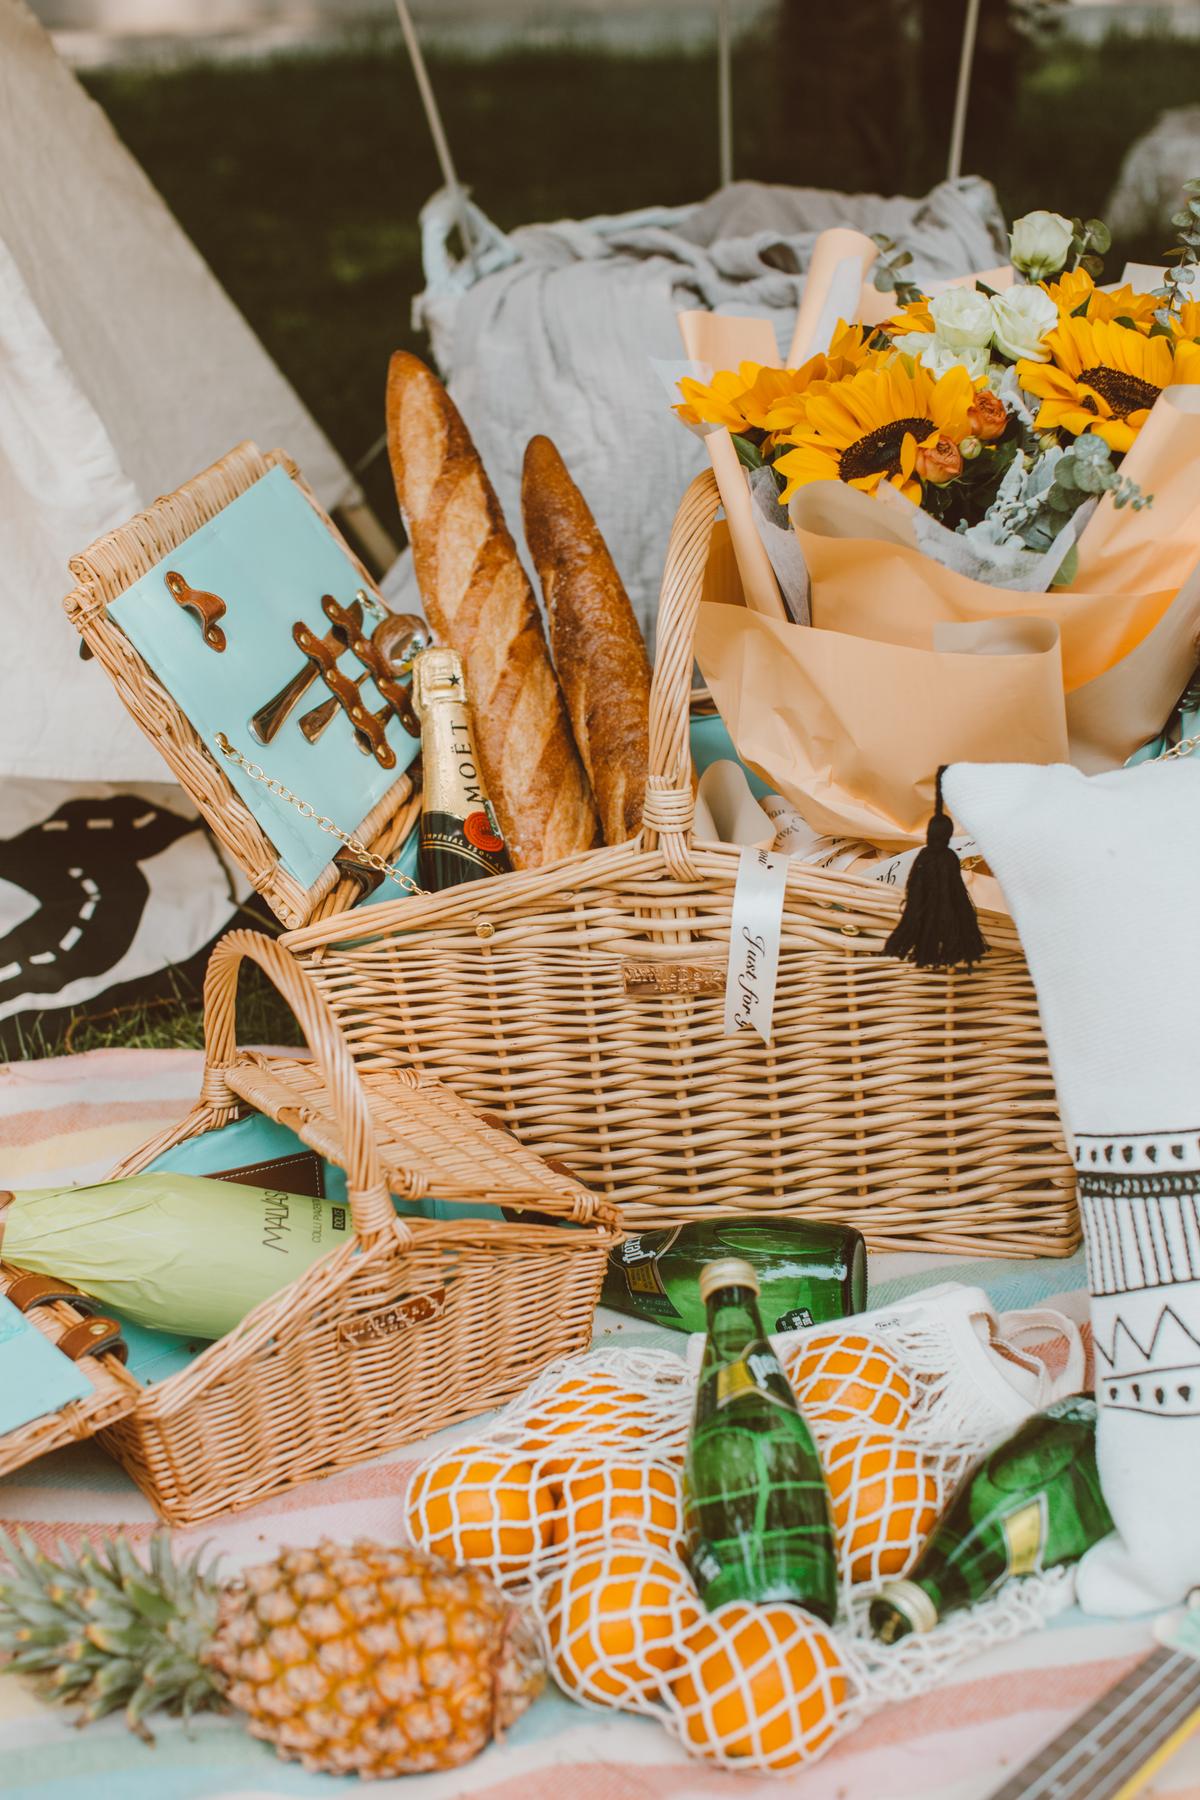 A picnic can be as complex as you want, or as simple as a loaf of French bread and wine (and water for the kids!). (Kin Li/Unsplash)